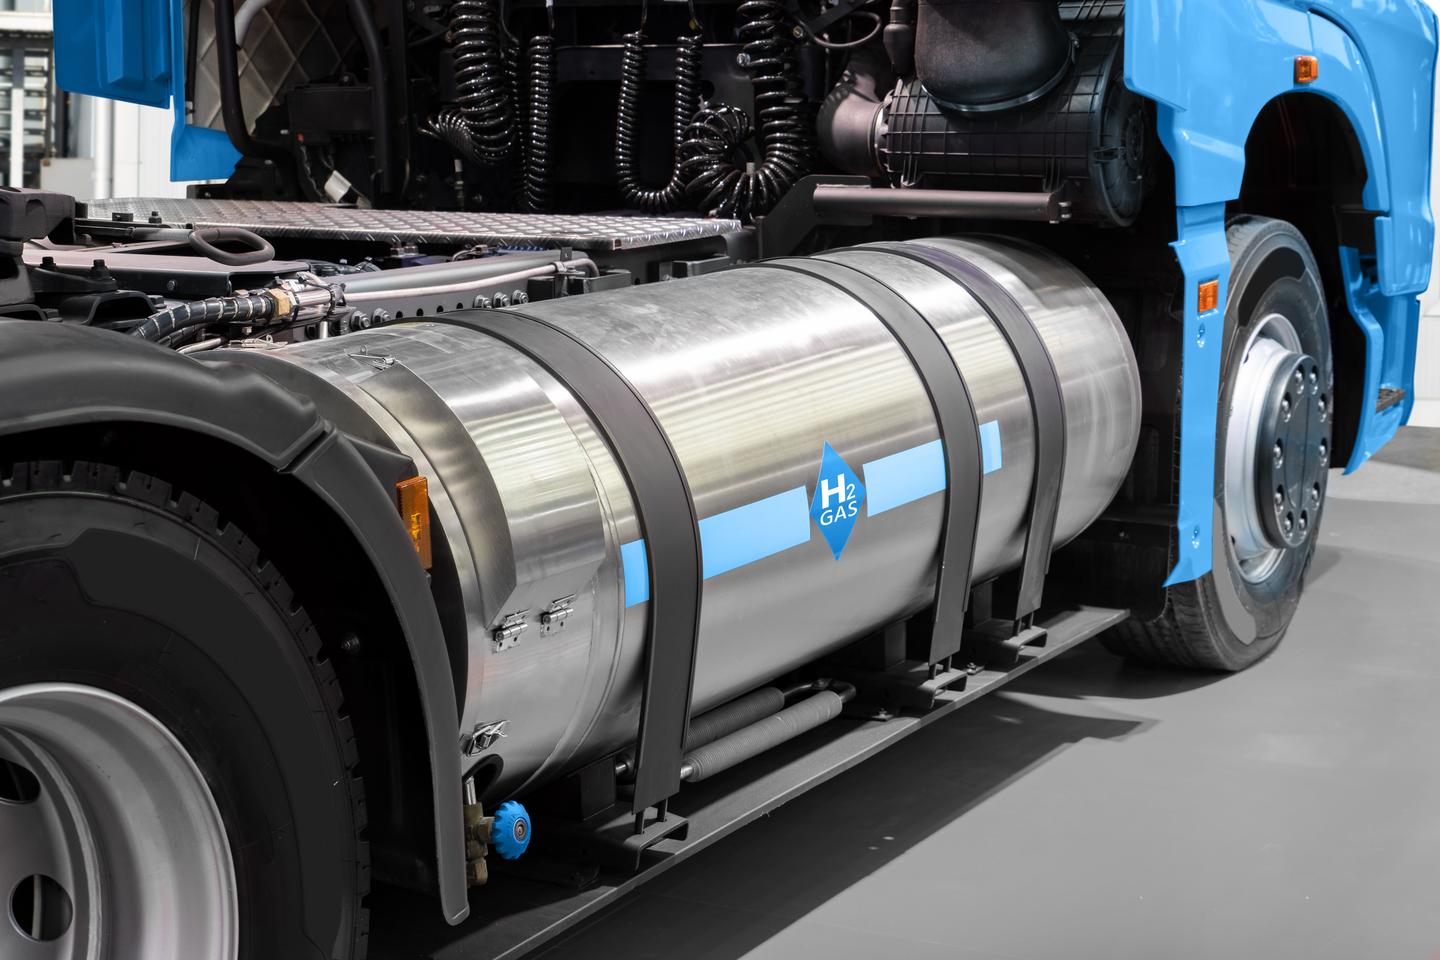 Storing compressed hydrogen gas in cylinders is energy-intensive, and requires heavy equipment